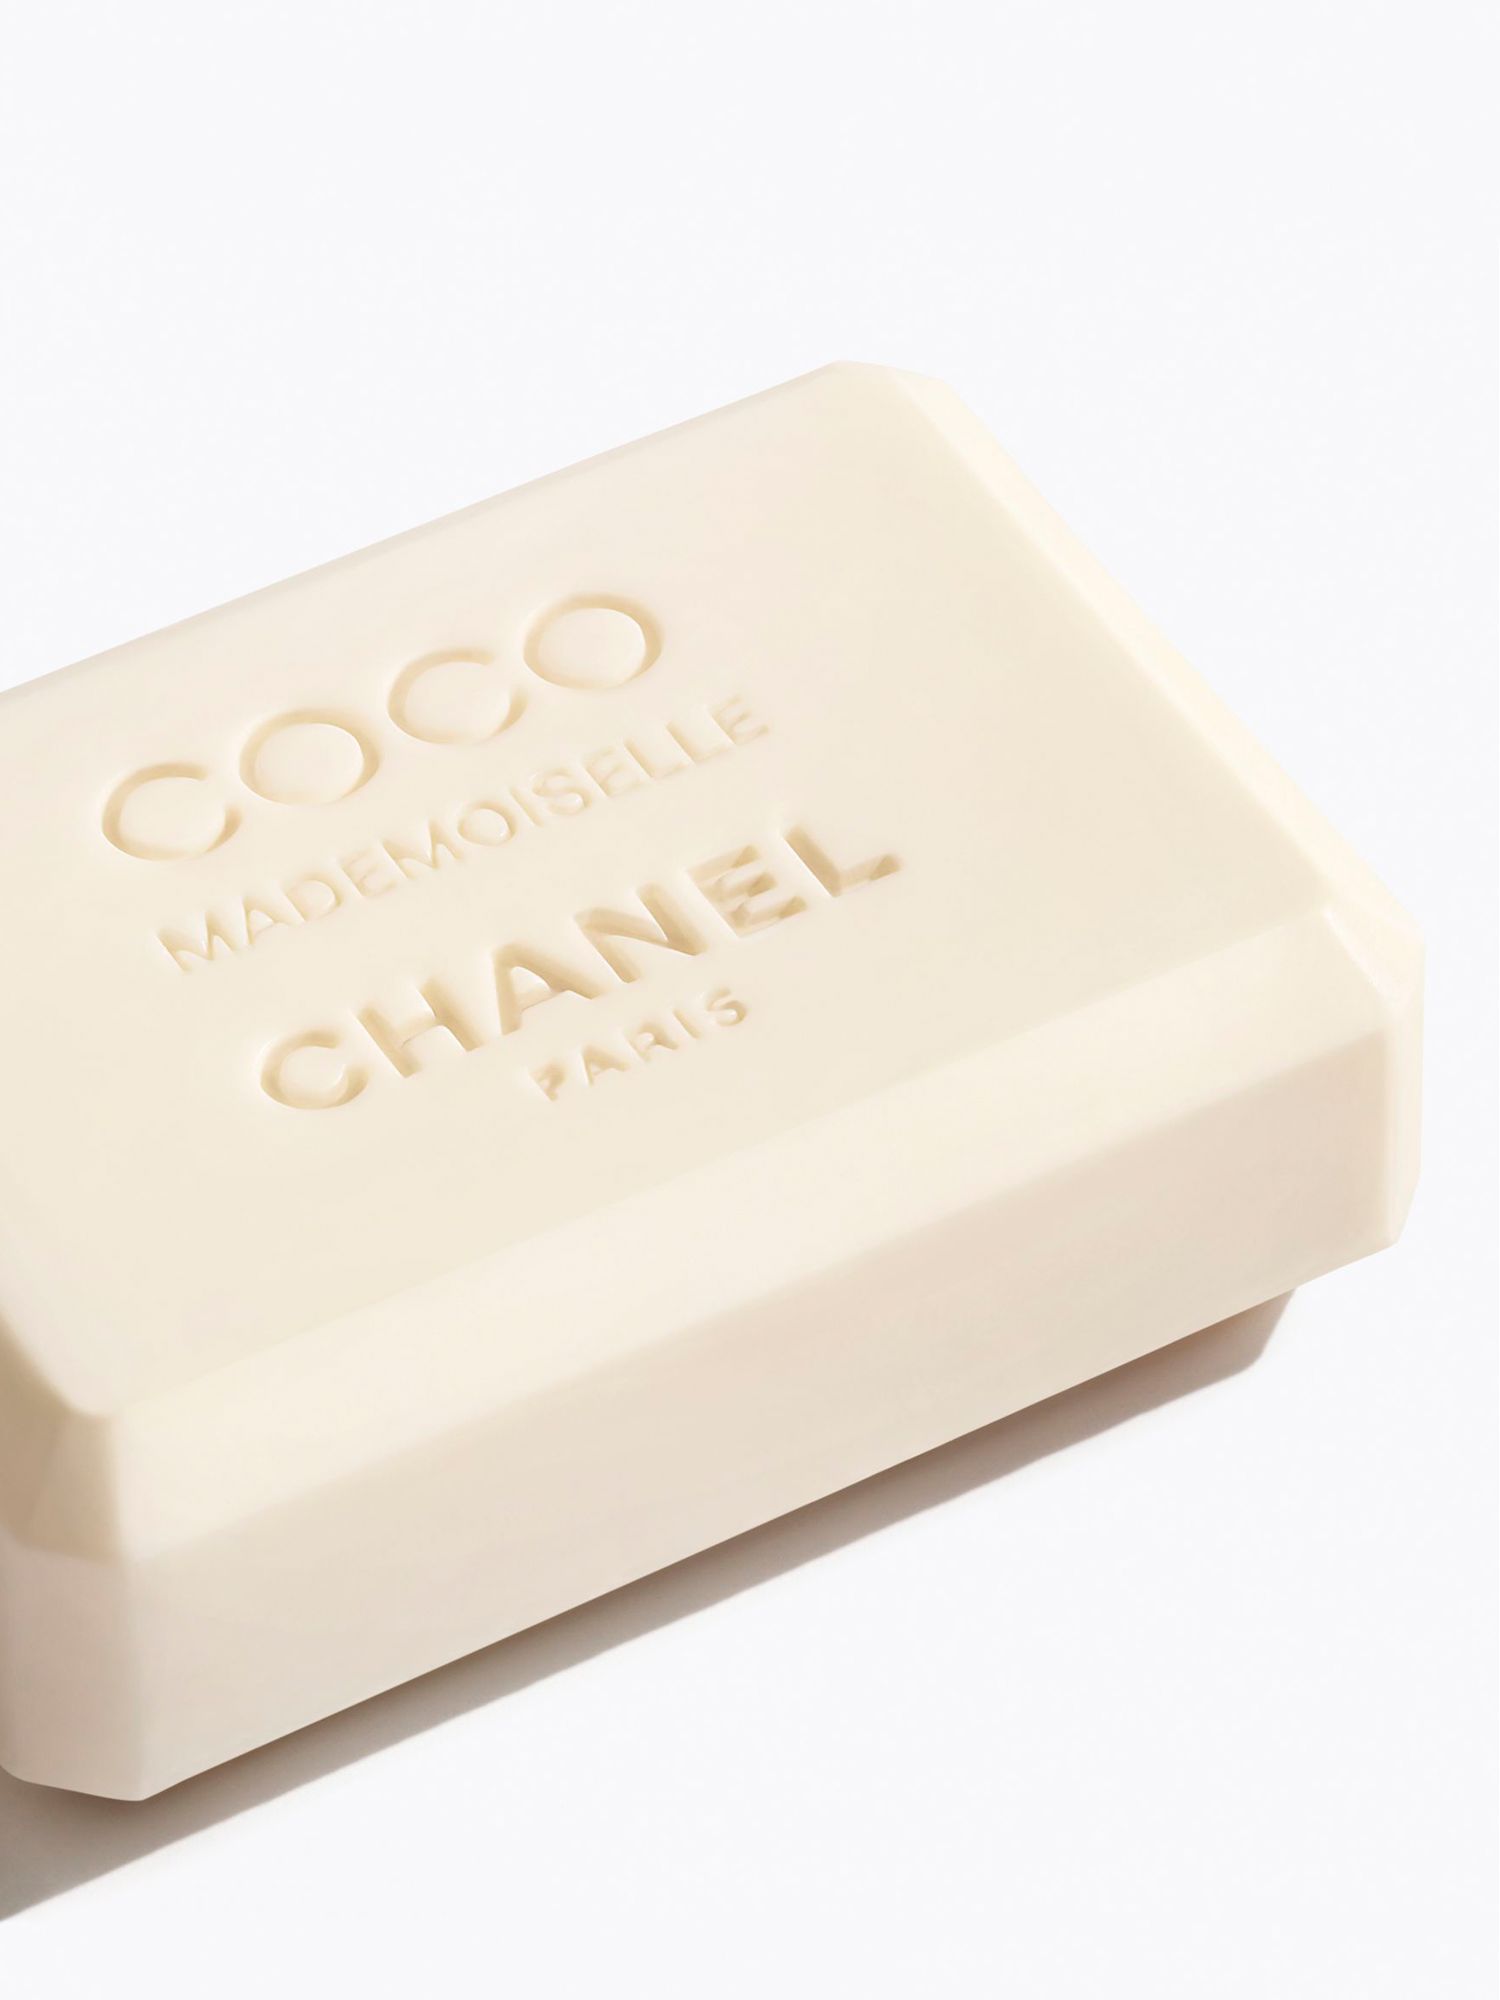 CHANEL Coco Mademoiselle Gentle Perfumed Soap, 100g 2